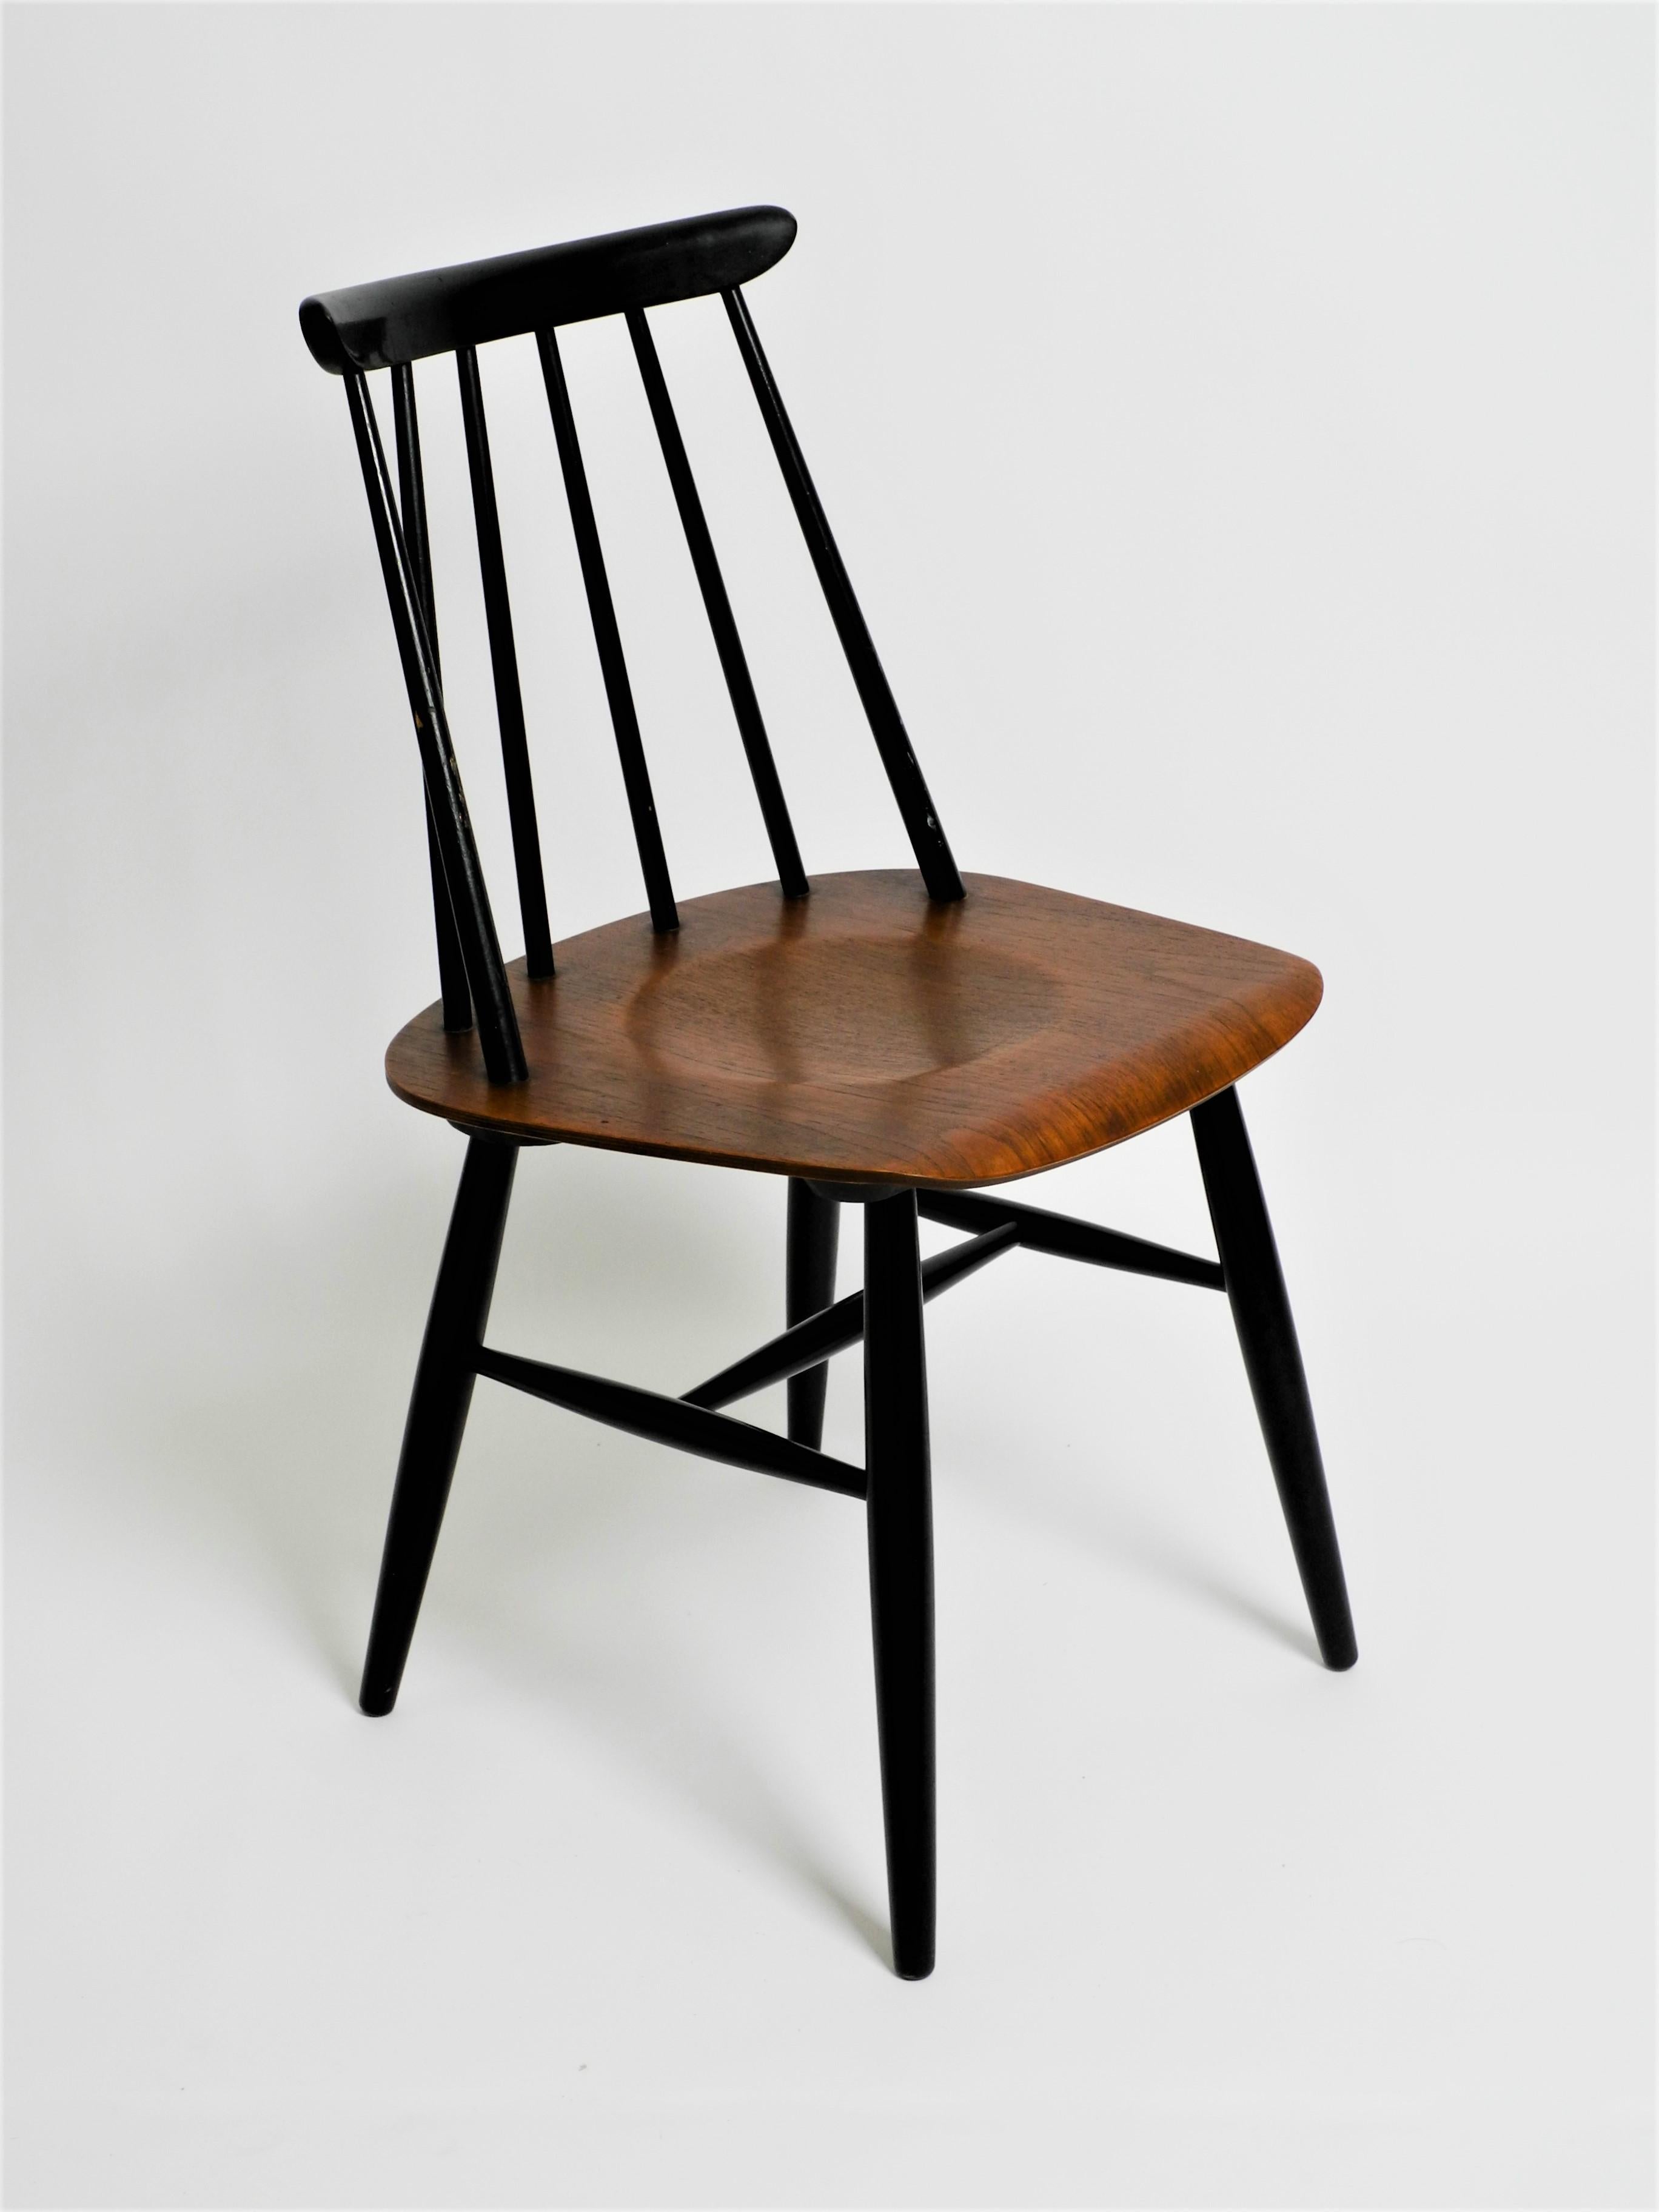 Original Fanett dining chair by Ilmari Tapiovaara for ASKO. From the 60's. With manufacturer's label on the bottom.

The chair is in a beautiful vintage condition. It has age-related signs of wear on the seat, backrest and legs. It is stable. The